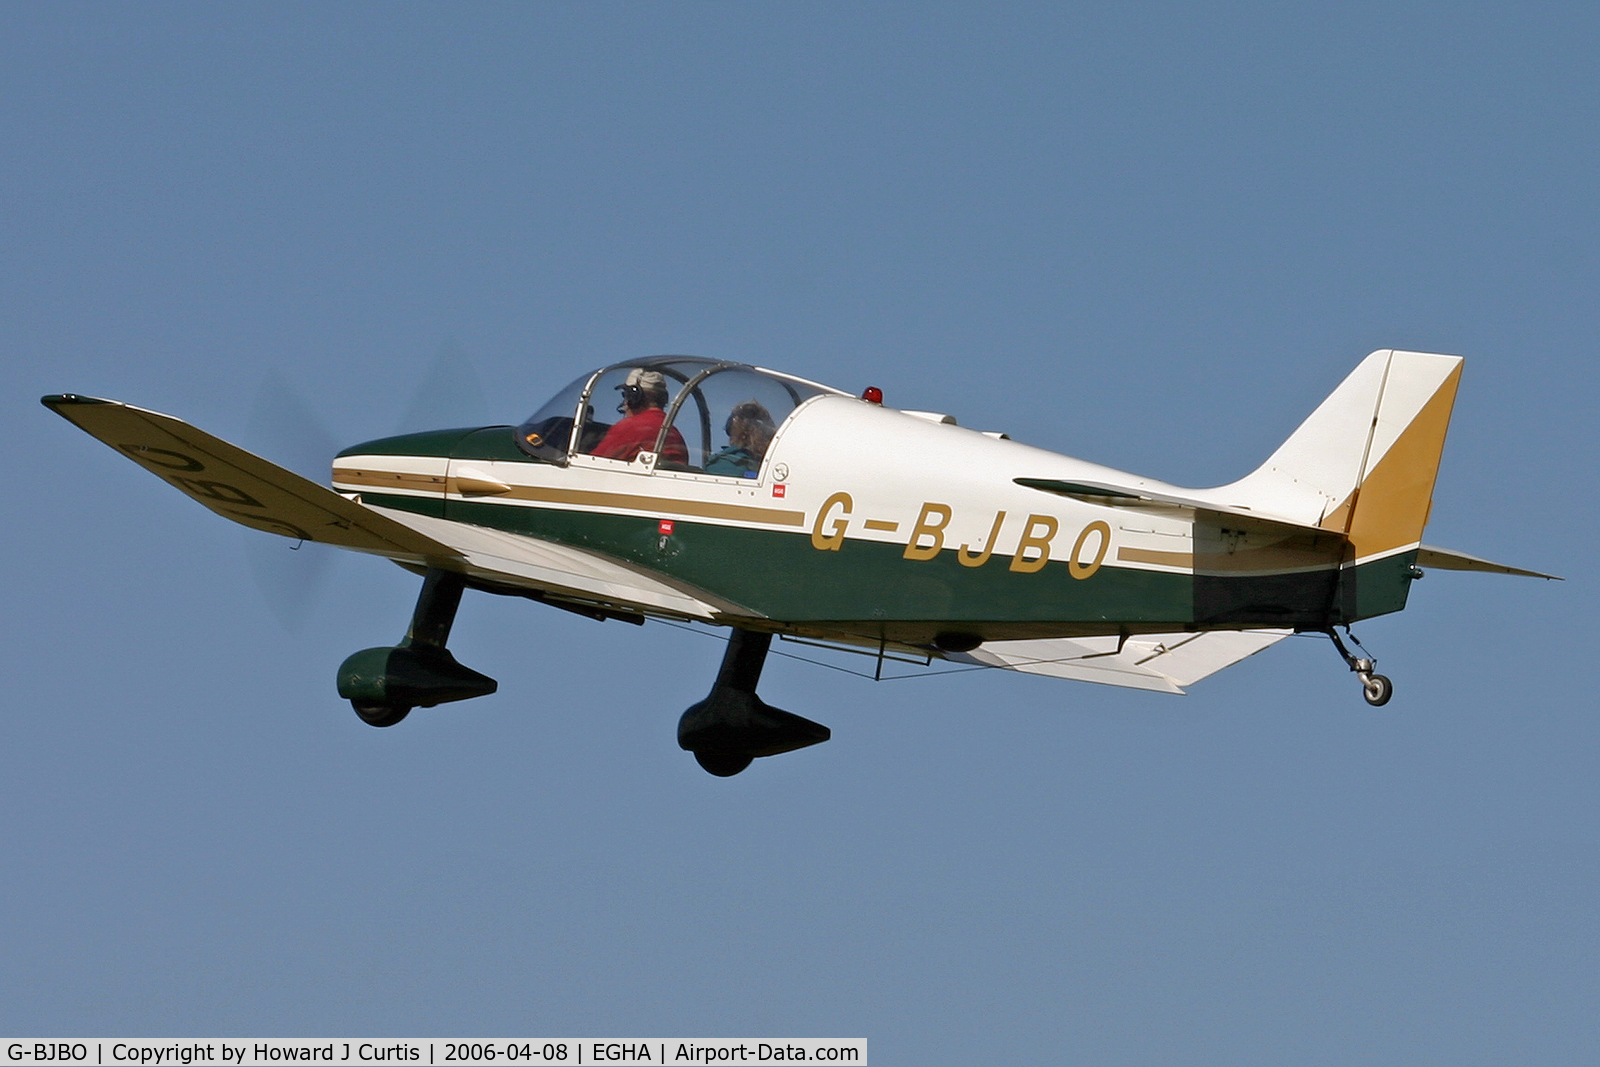 G-BJBO, 1966 CEA Jodel DR-250-160 Capitaine C/N 40, Privately owned.